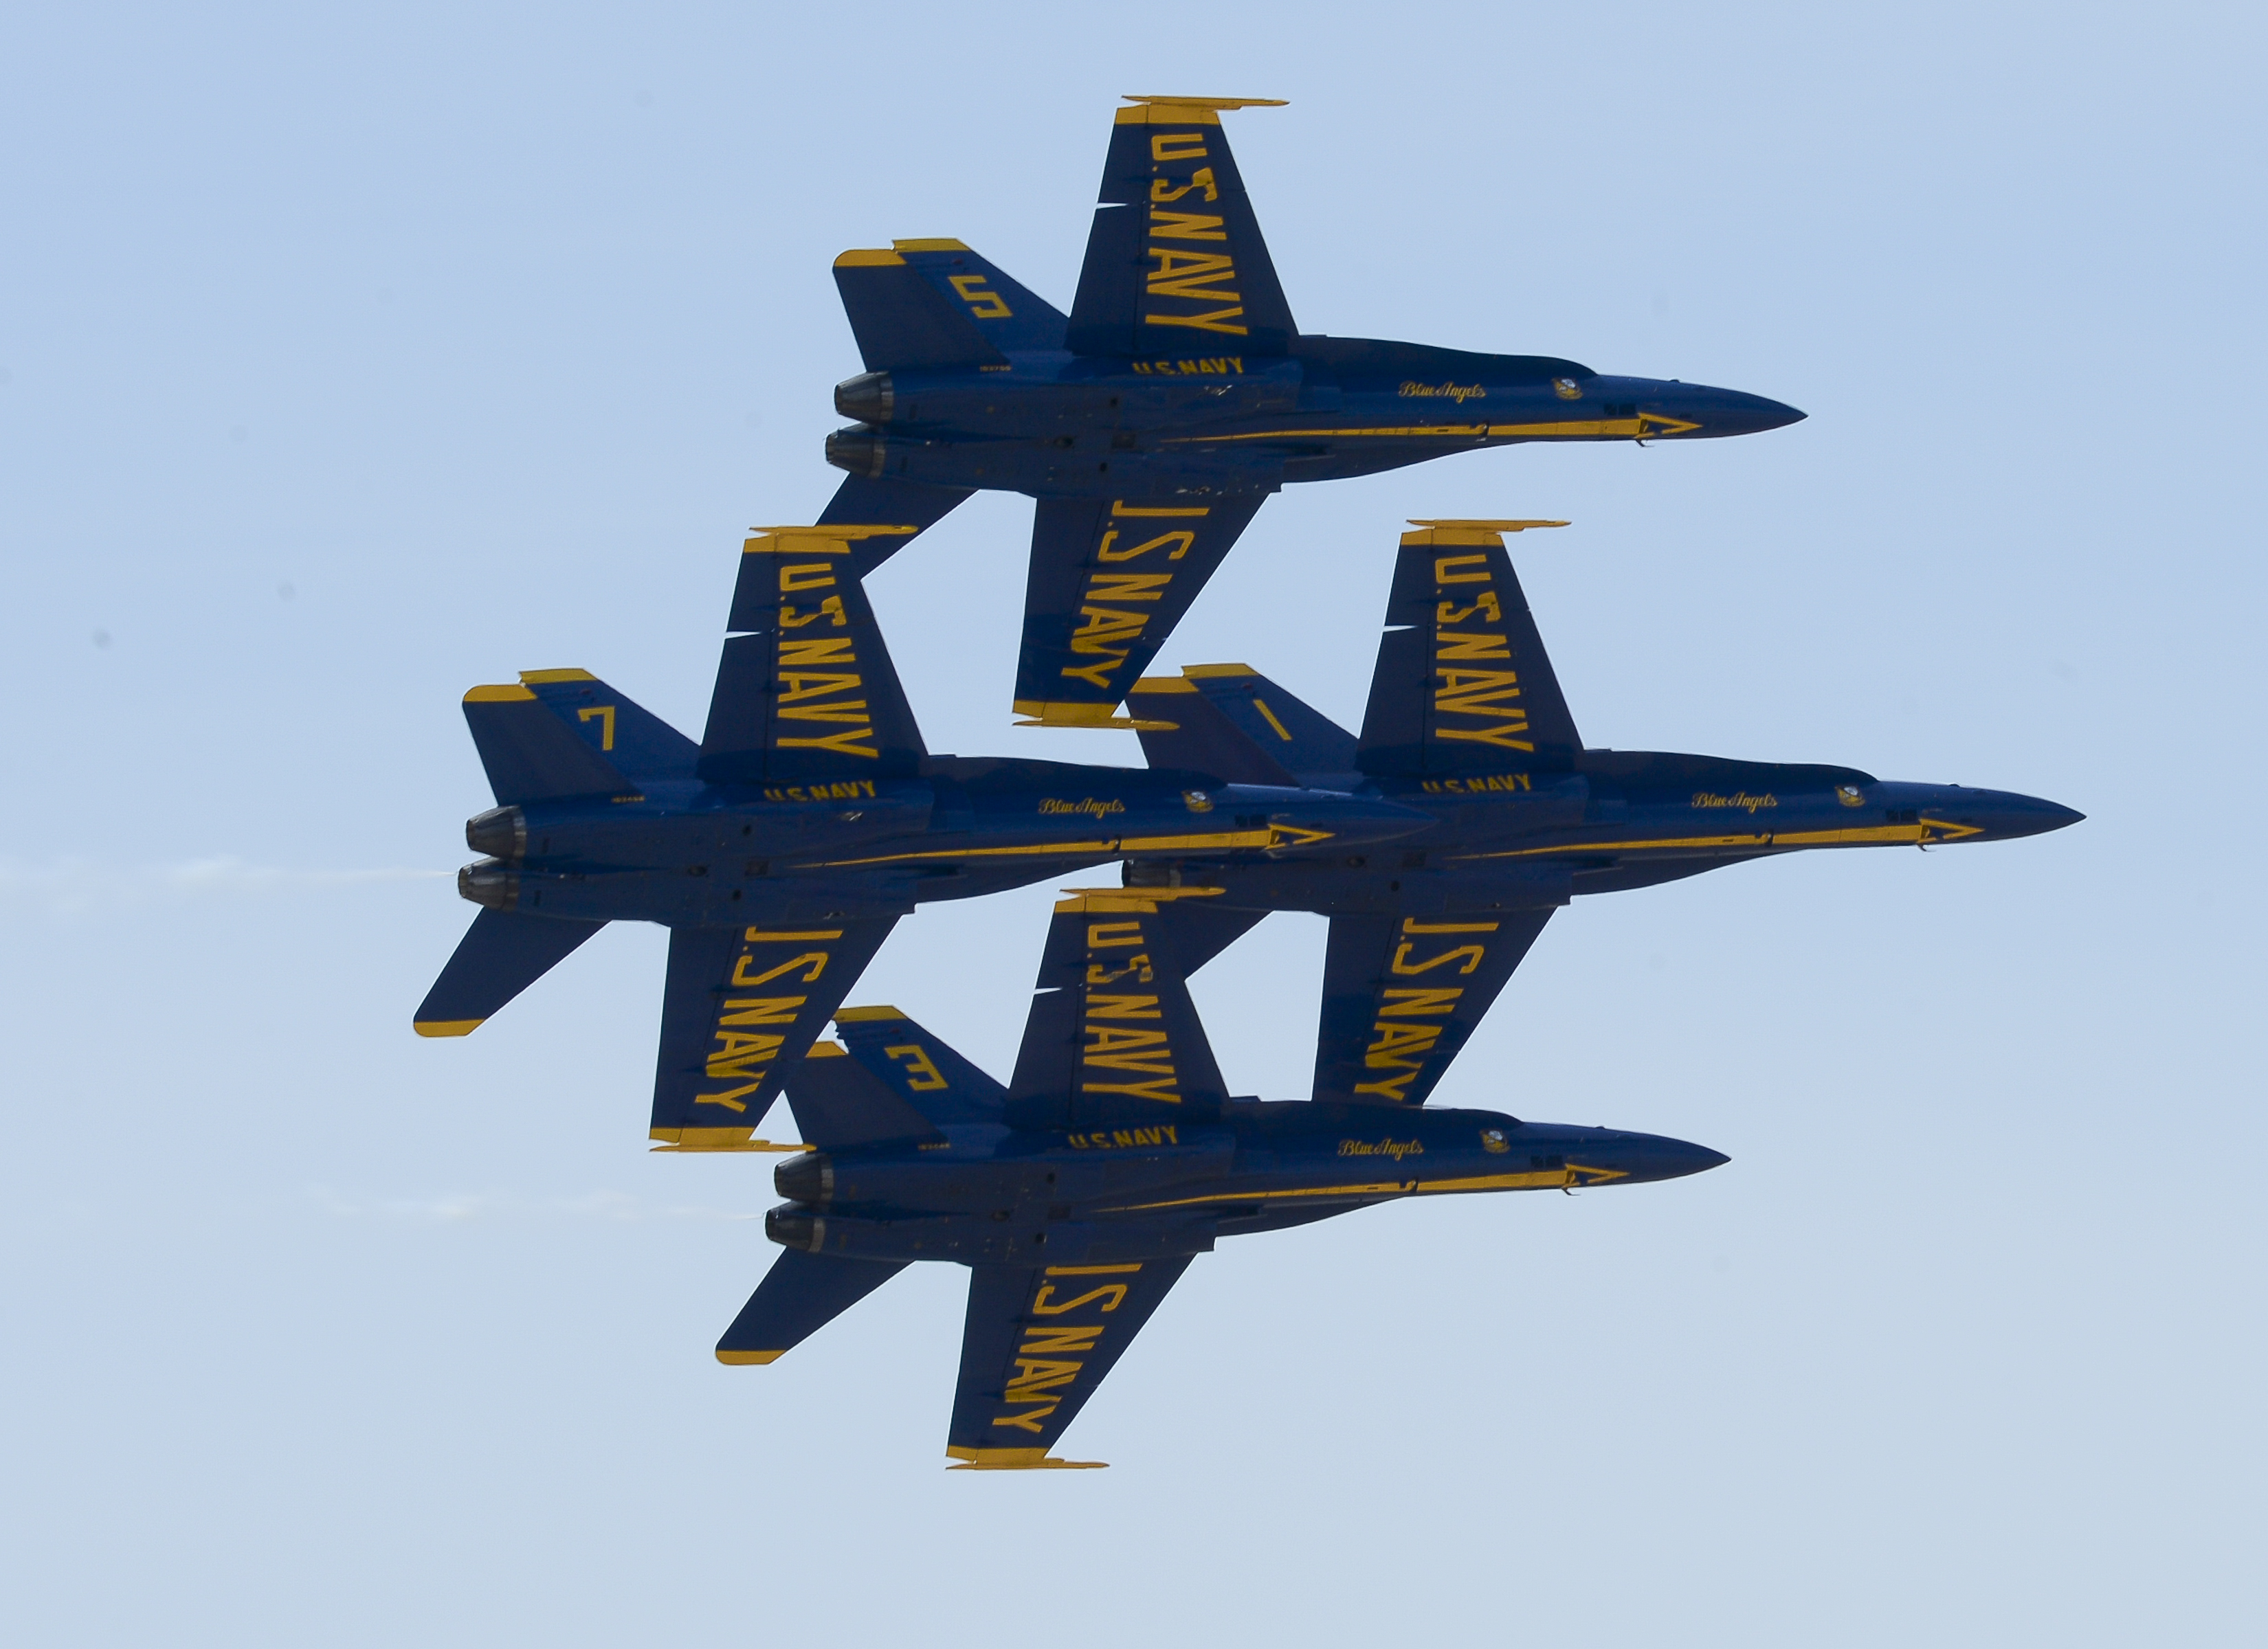 U.S. Navy Blue Angels Air Show Season Is Here | Navy Live